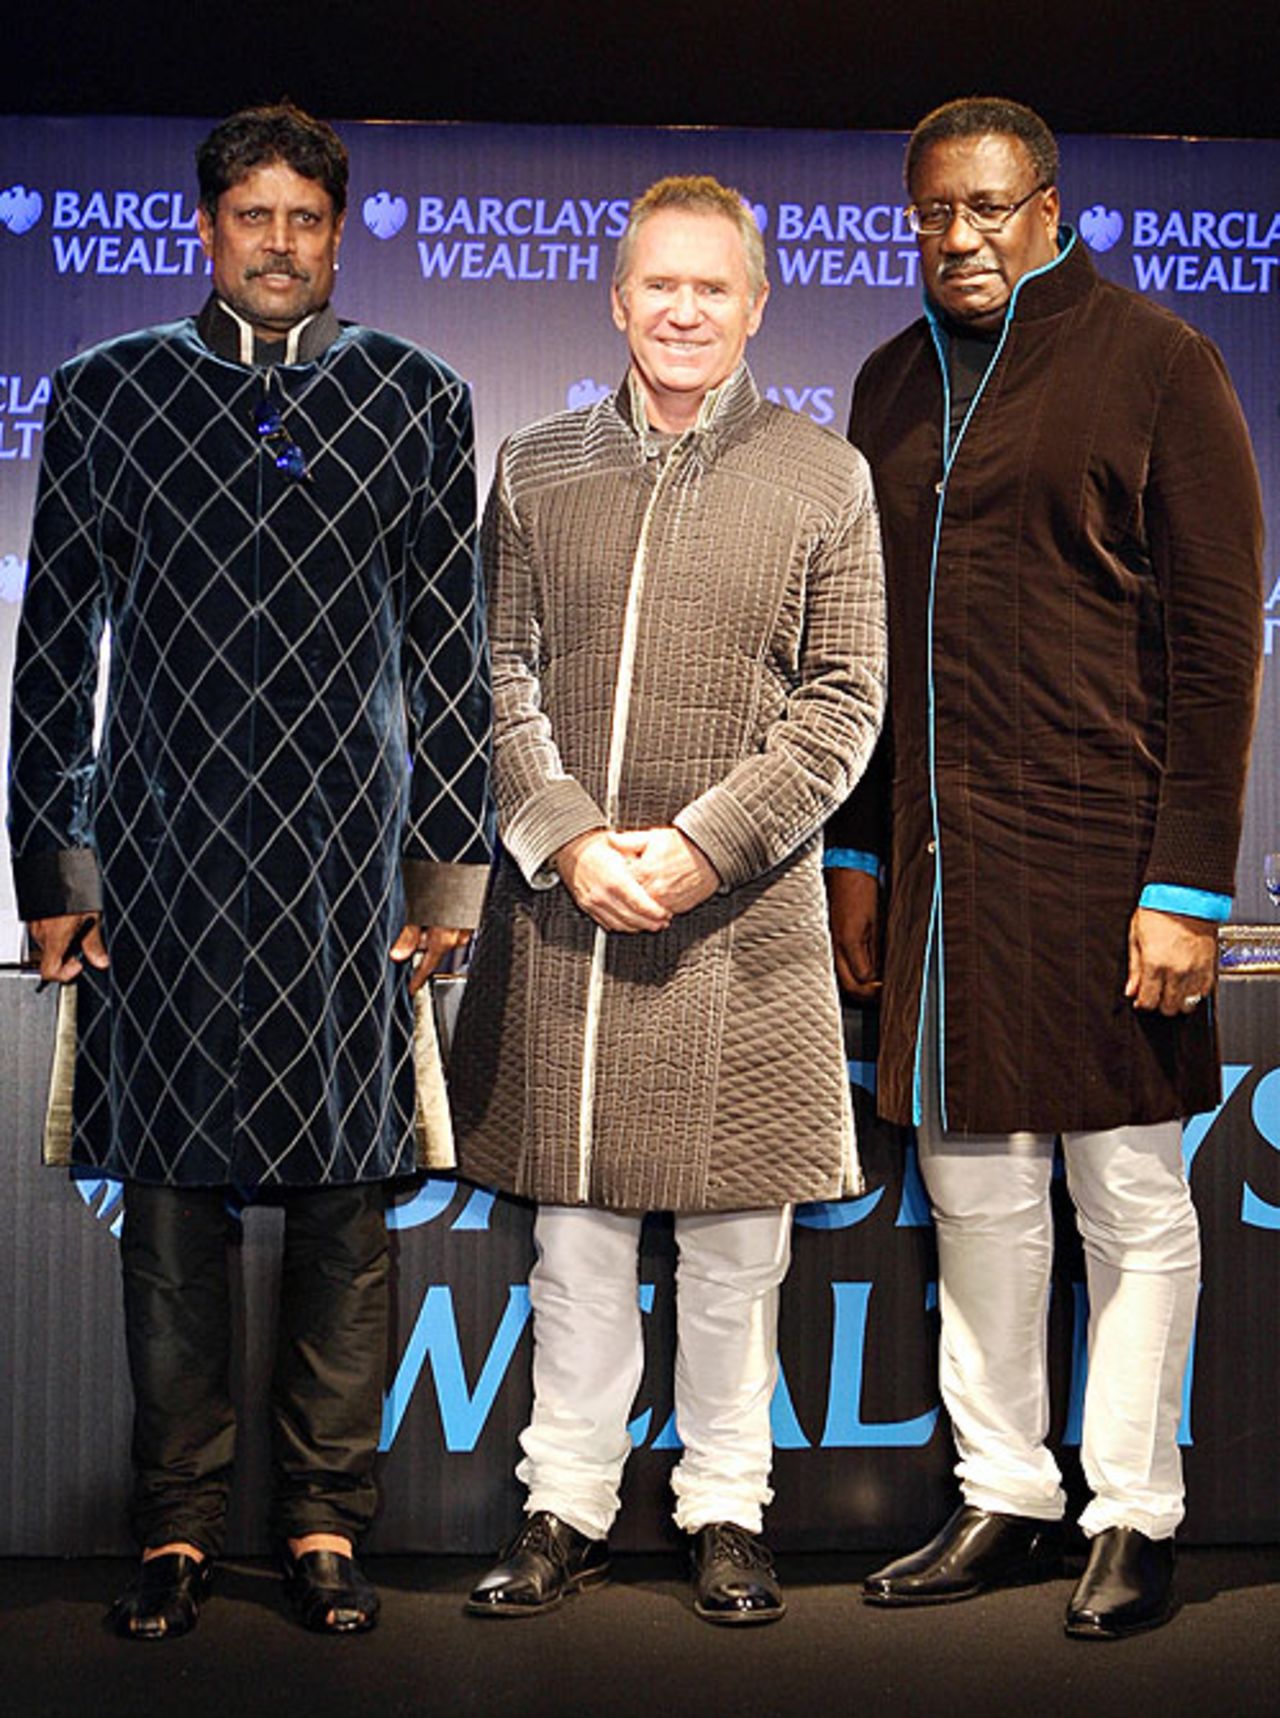 Kapil Dev, Allan Border and Clive Lloyd demonstrate a dubious line in fashion at a sponsor's event, November 19, 2008